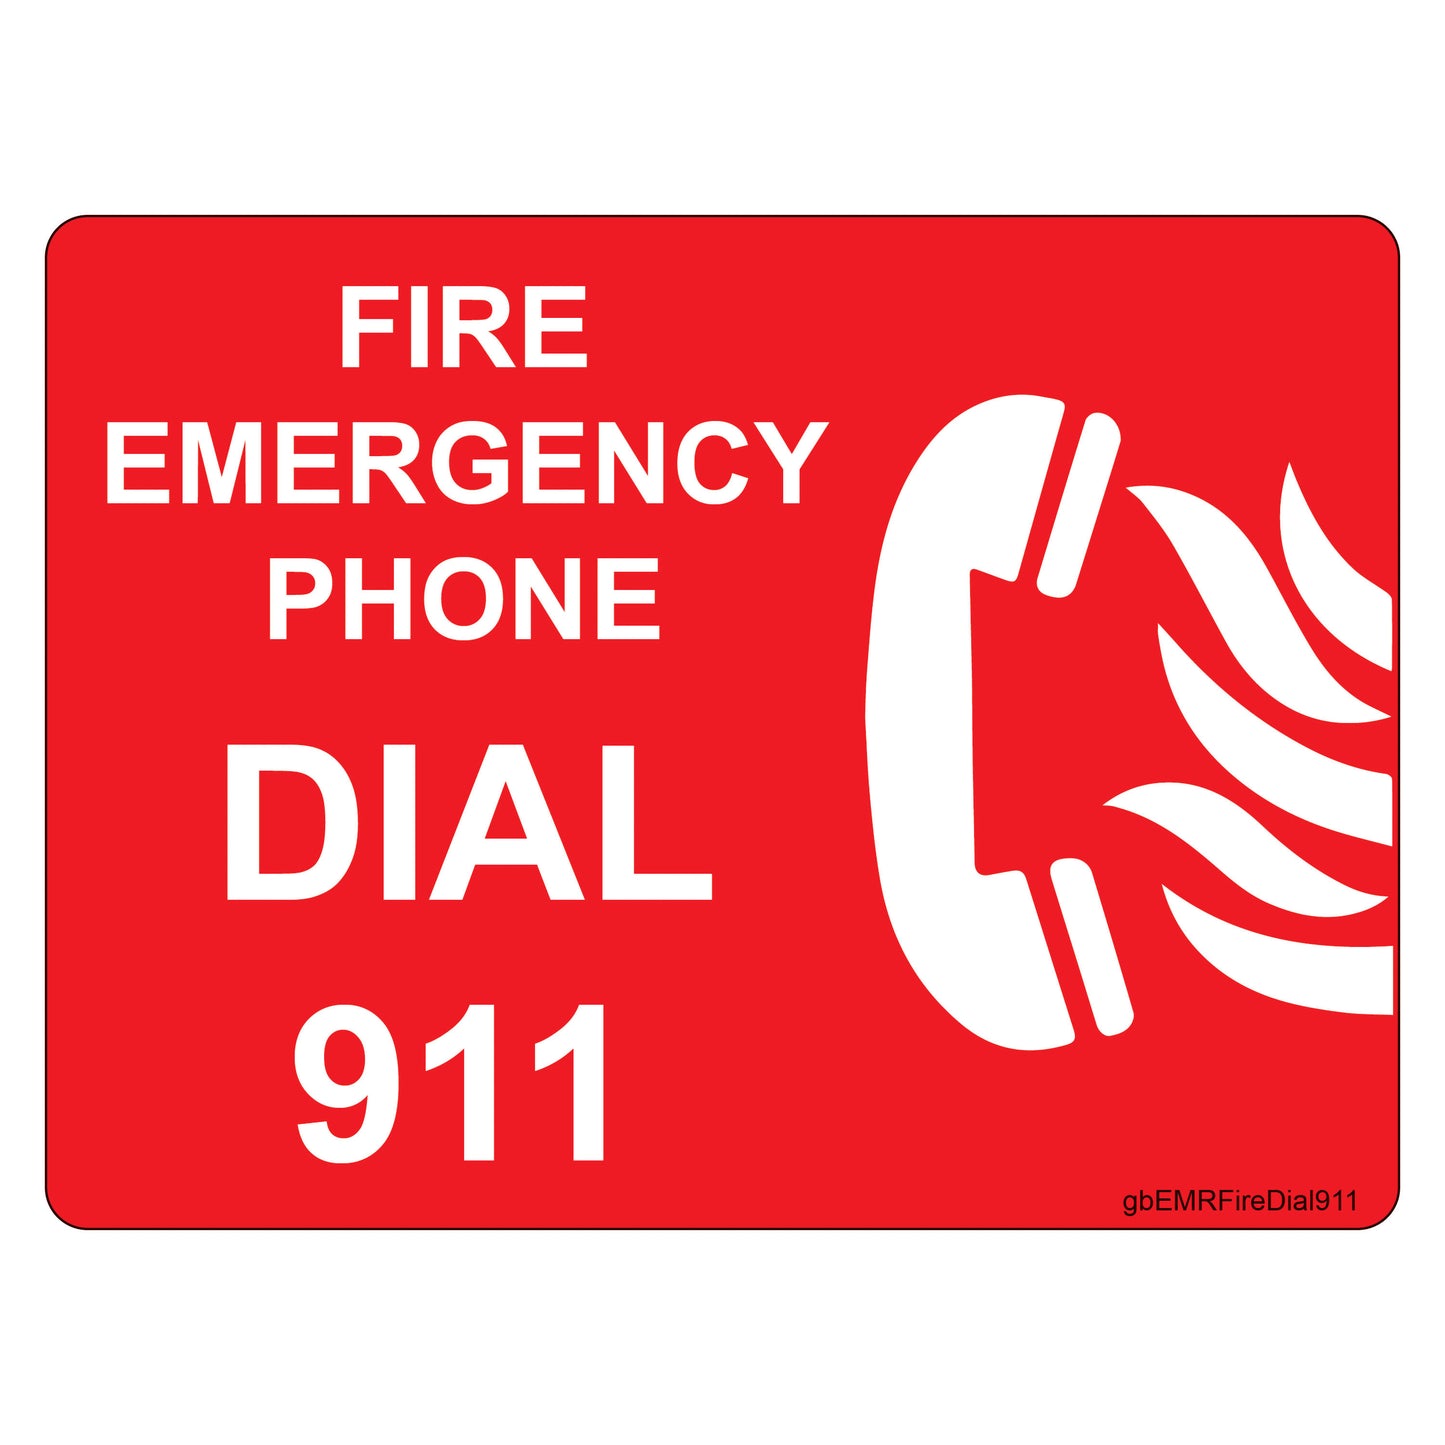 Fire Emergency Phone Dial 911 Decal. 4 inches by 3 inches in size.